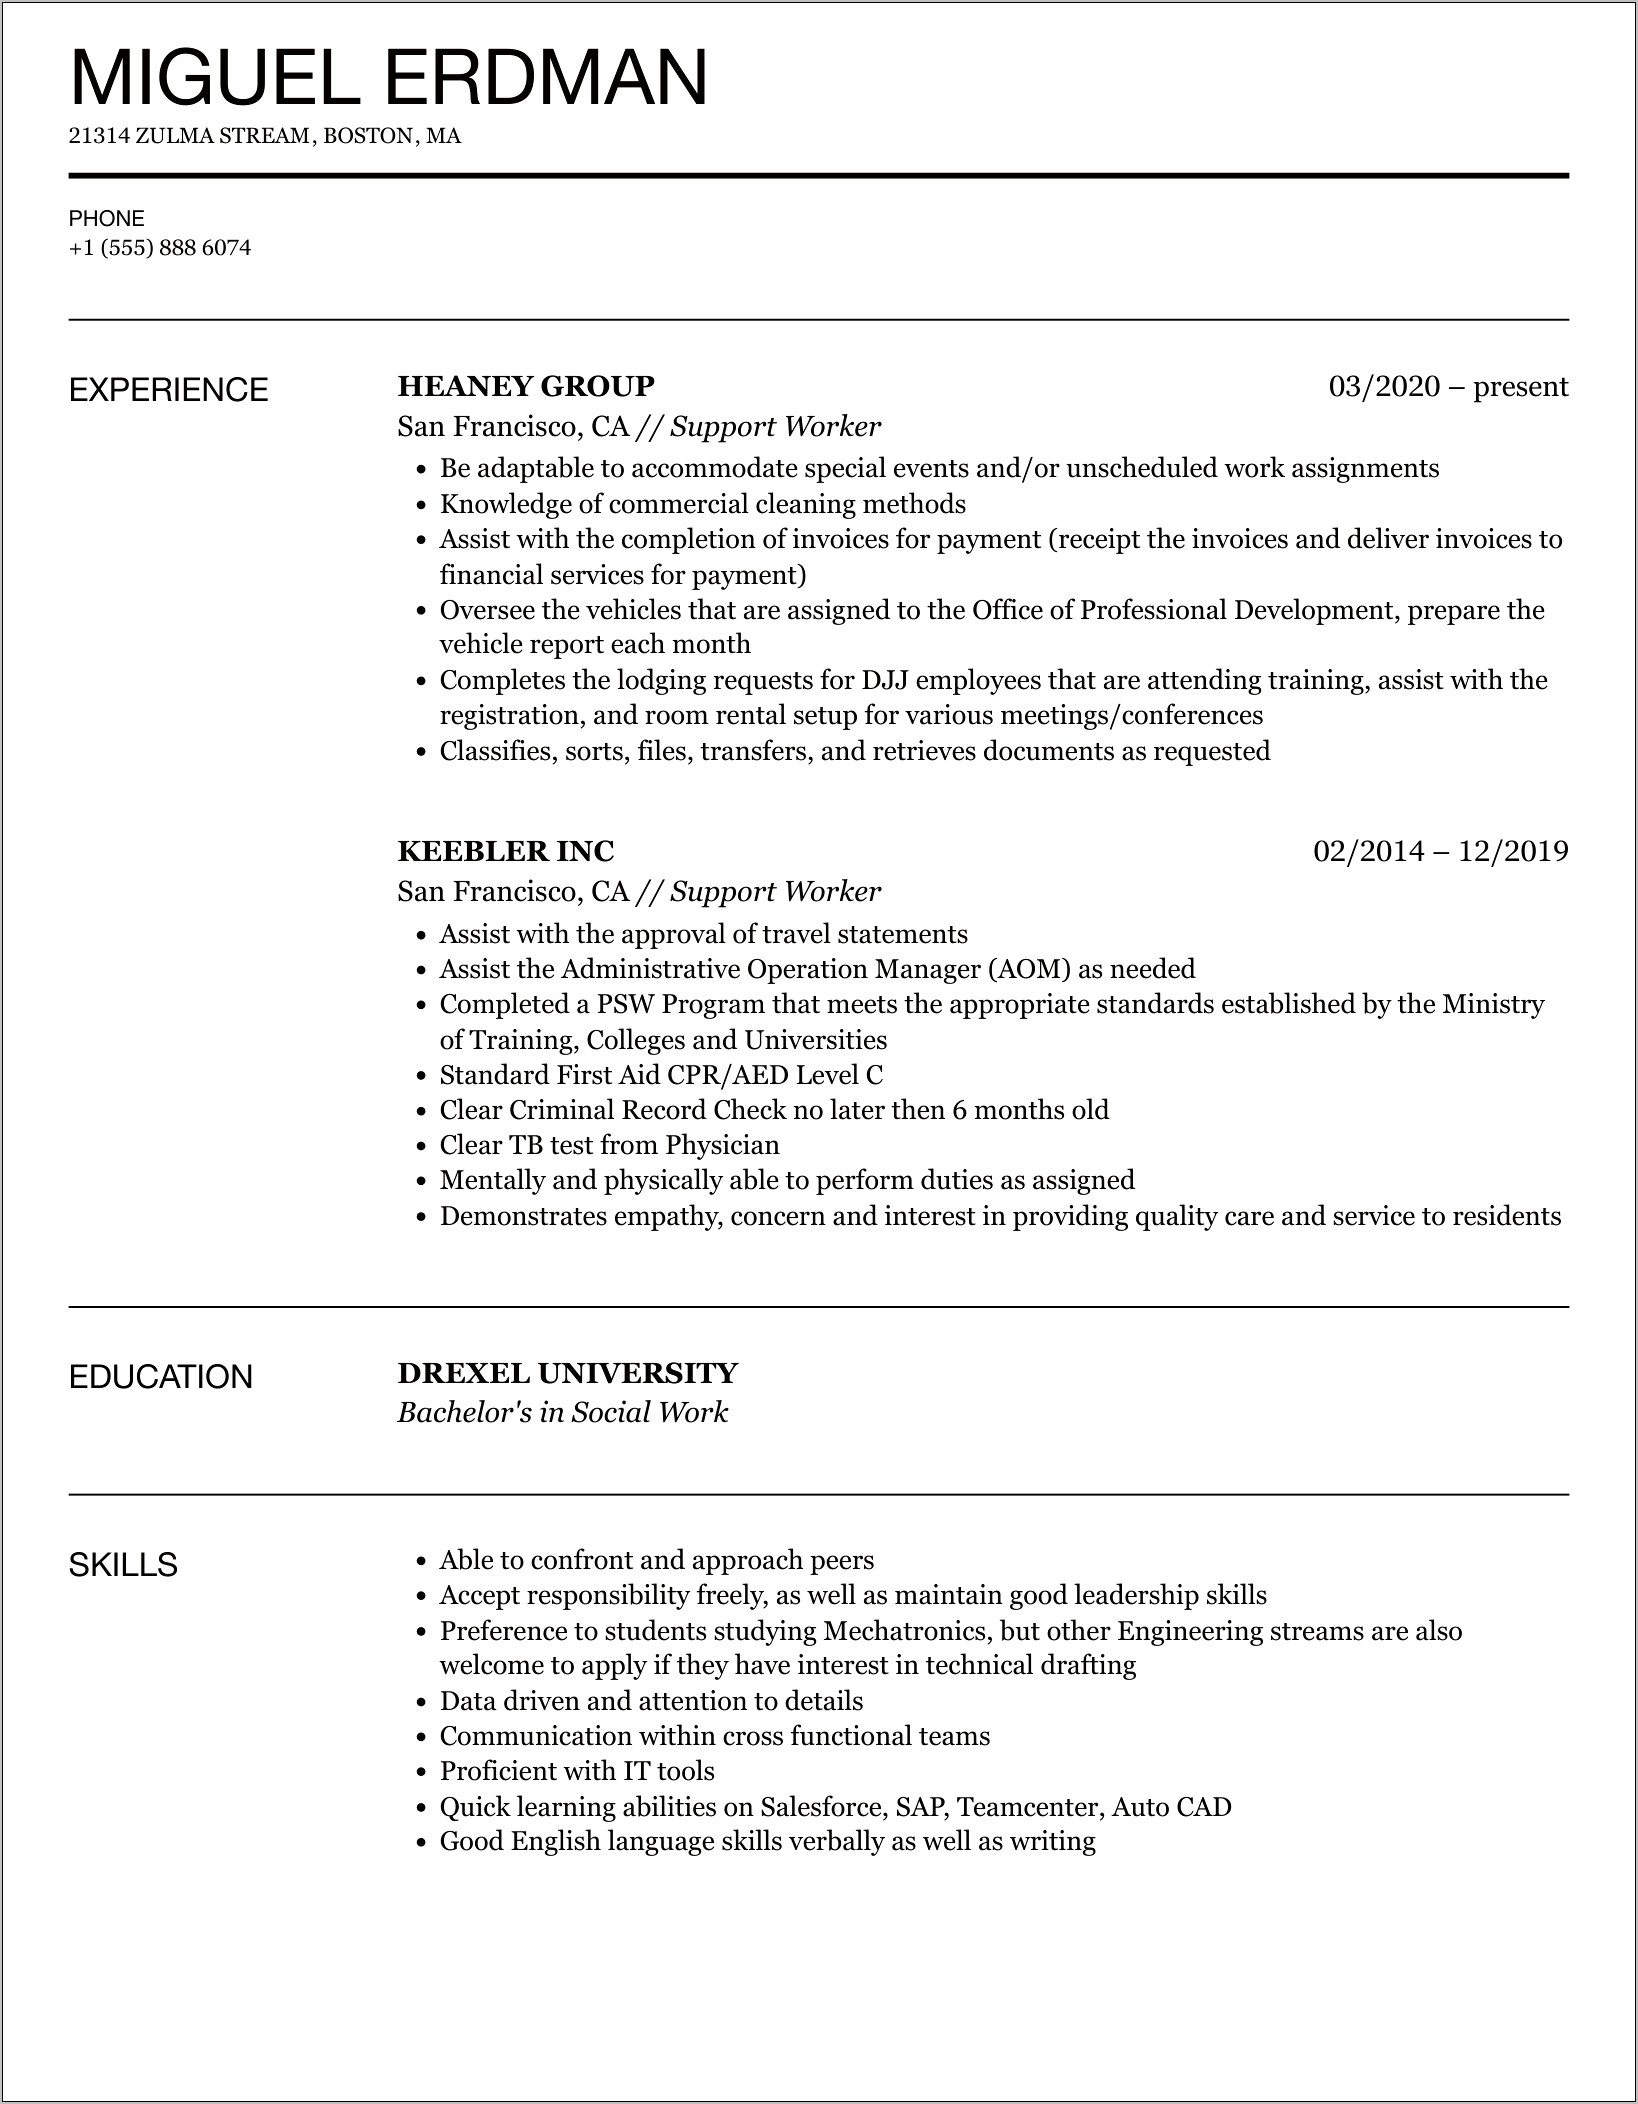 Resume Objective For Older Workers